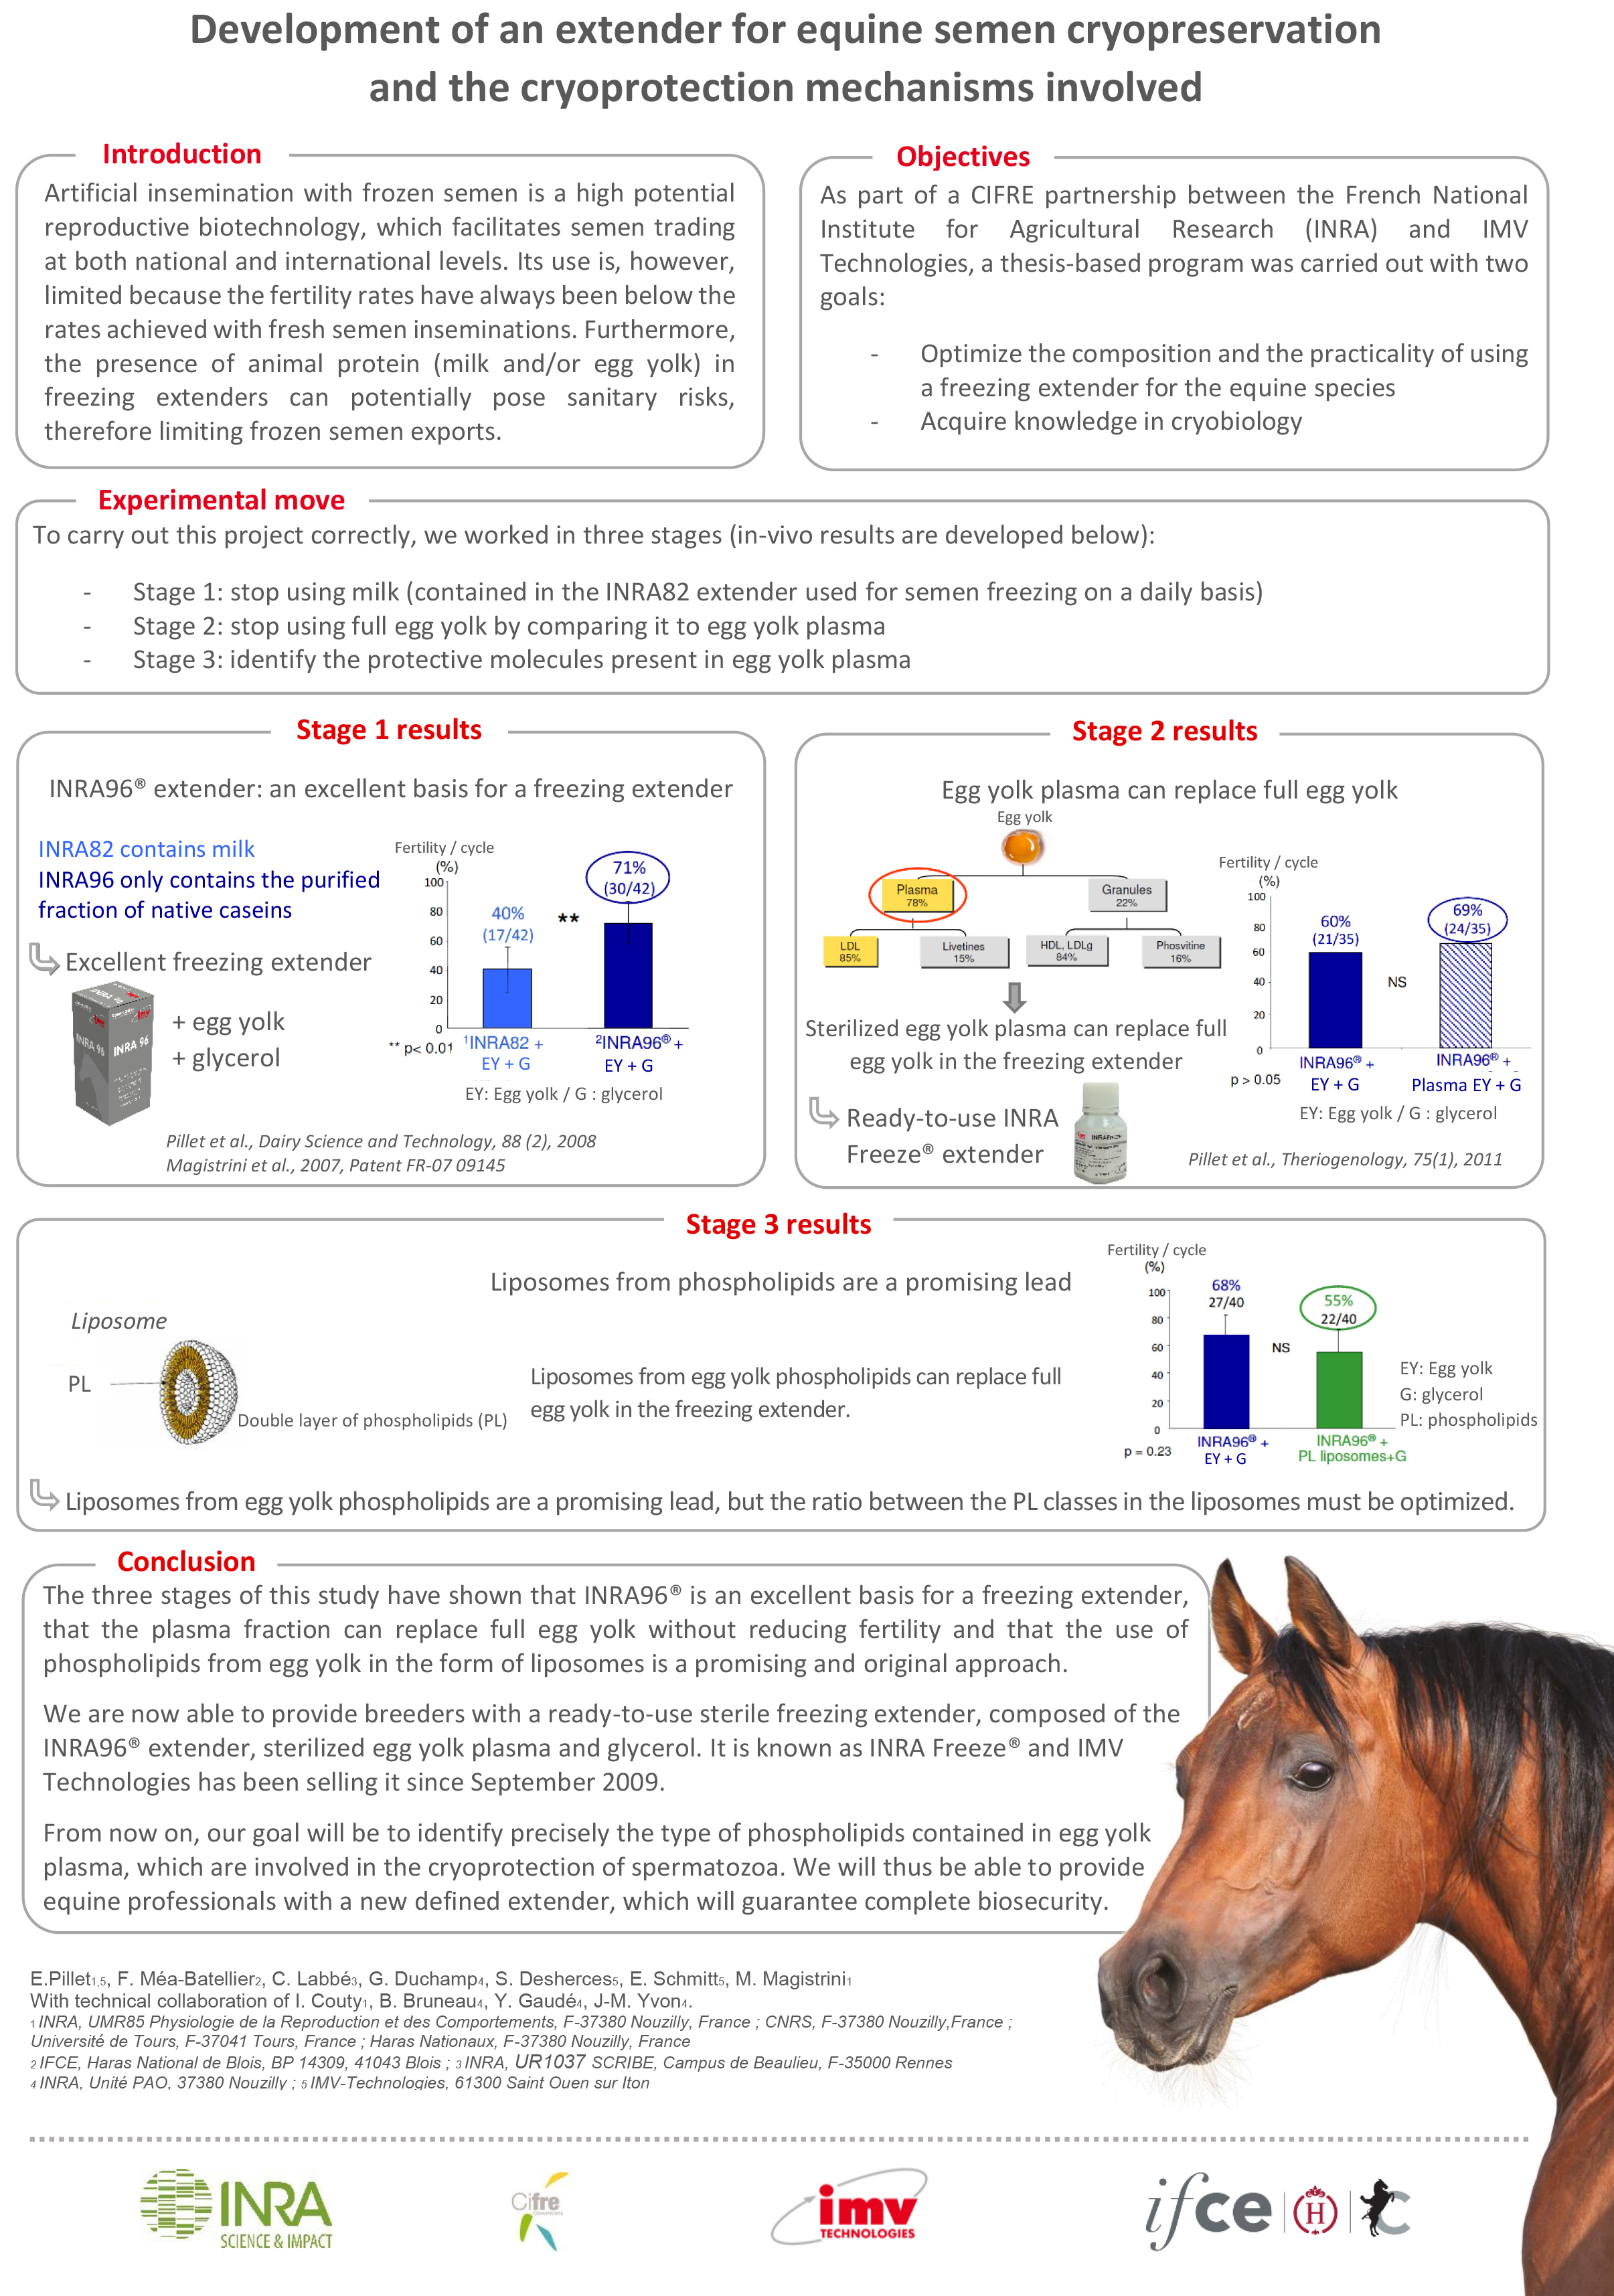 Development of an extender for equine semen cryopreservation and the cryoprotection mechanisms involved